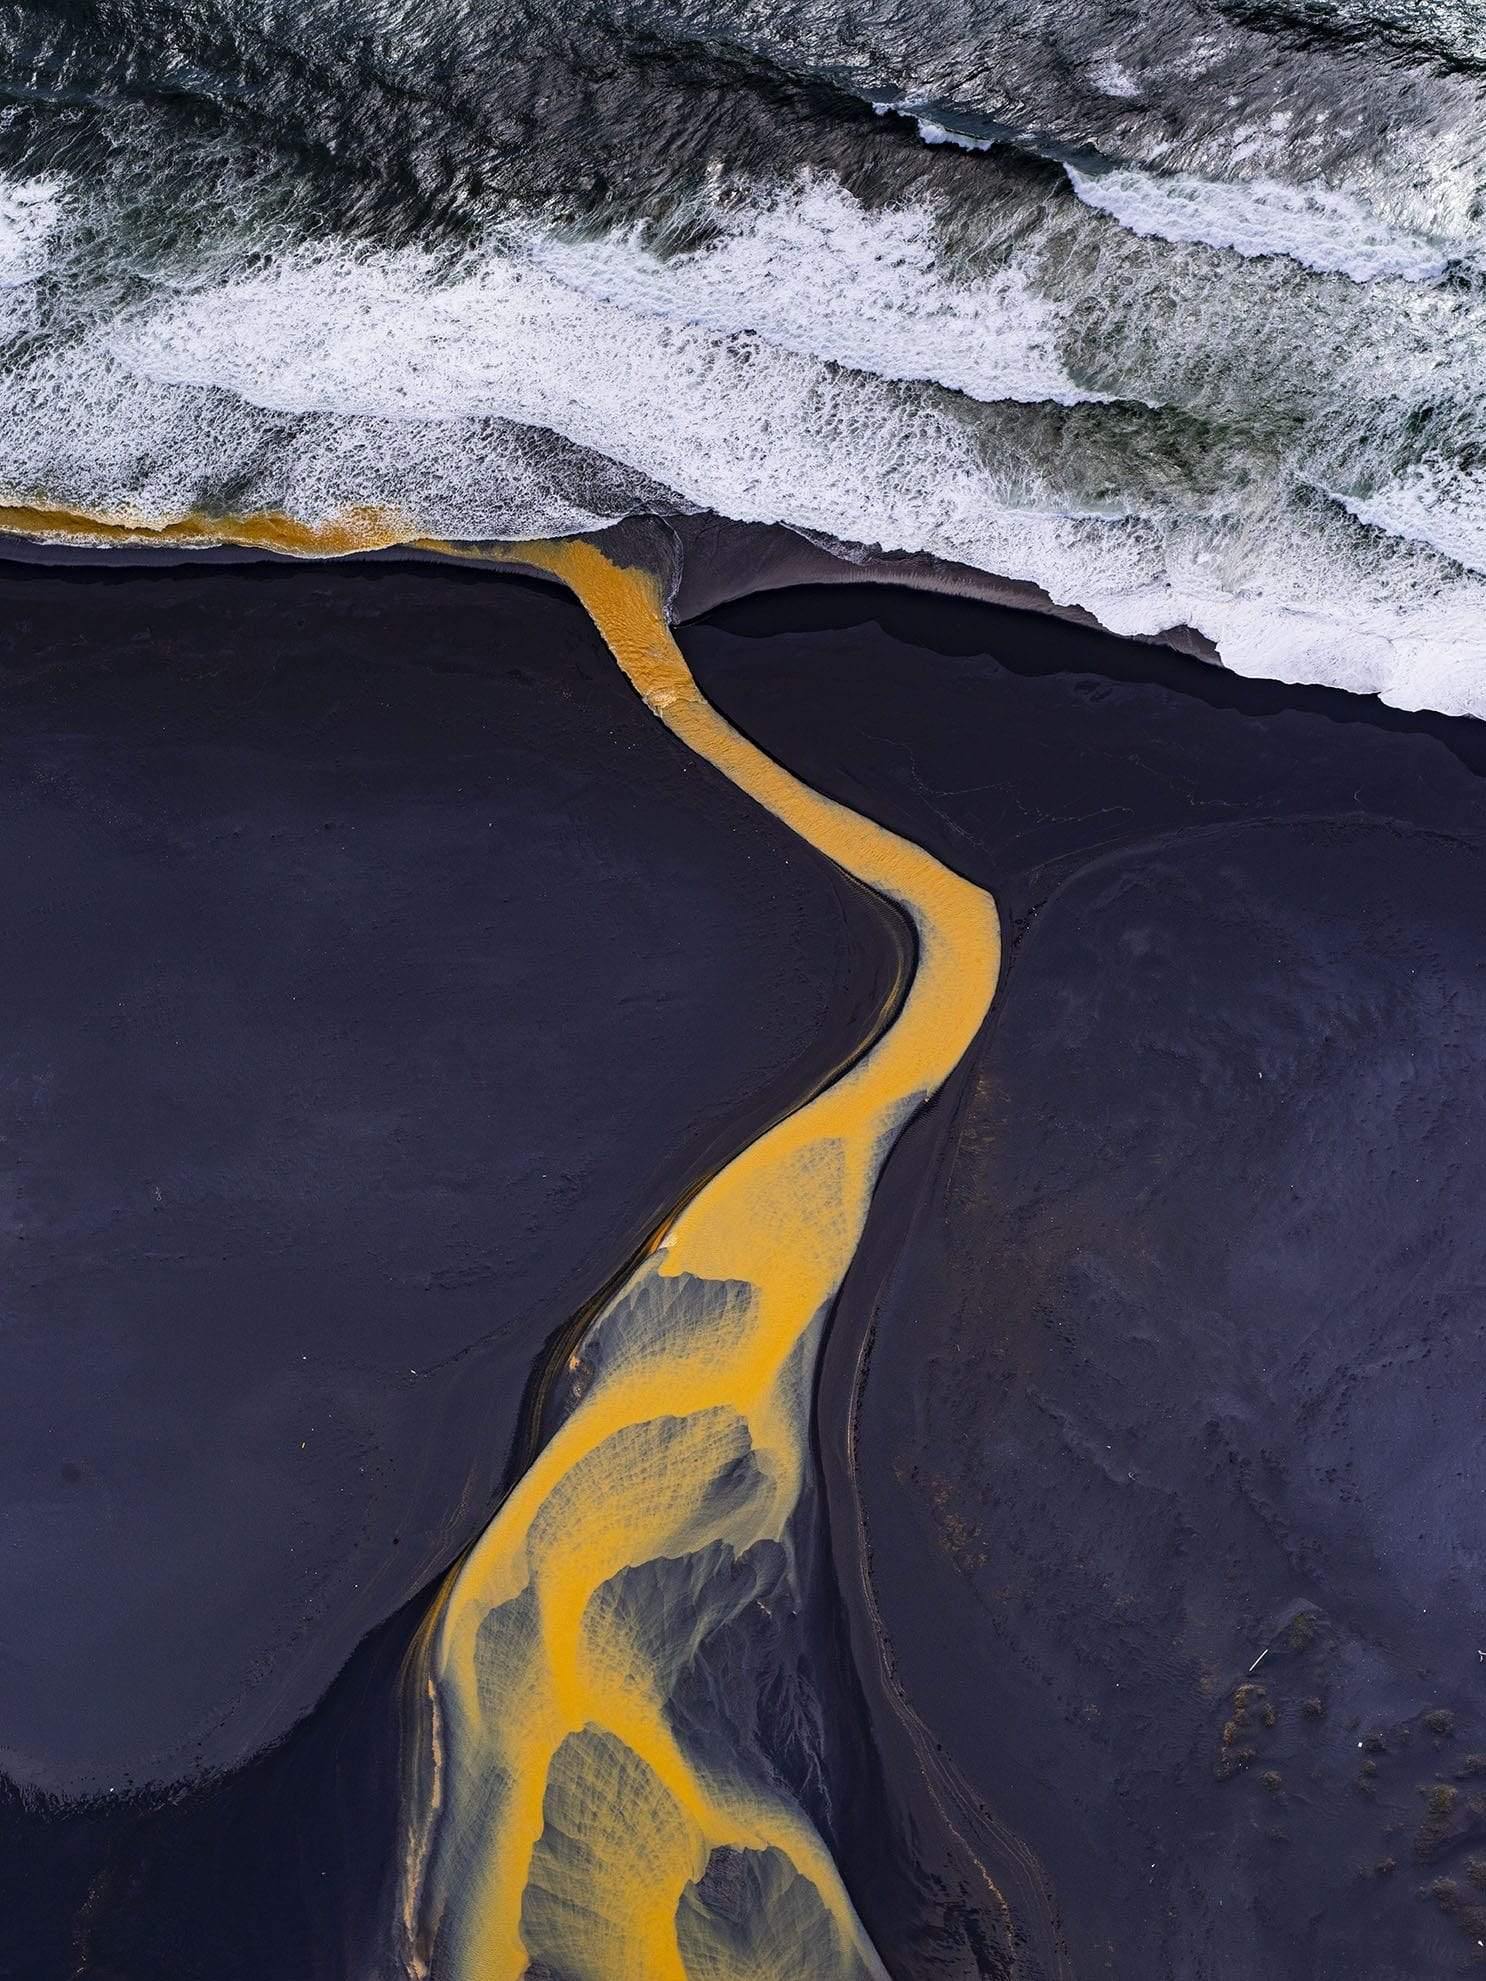 The yellow curvy line on a black surface following the sea below, Rustic Waters